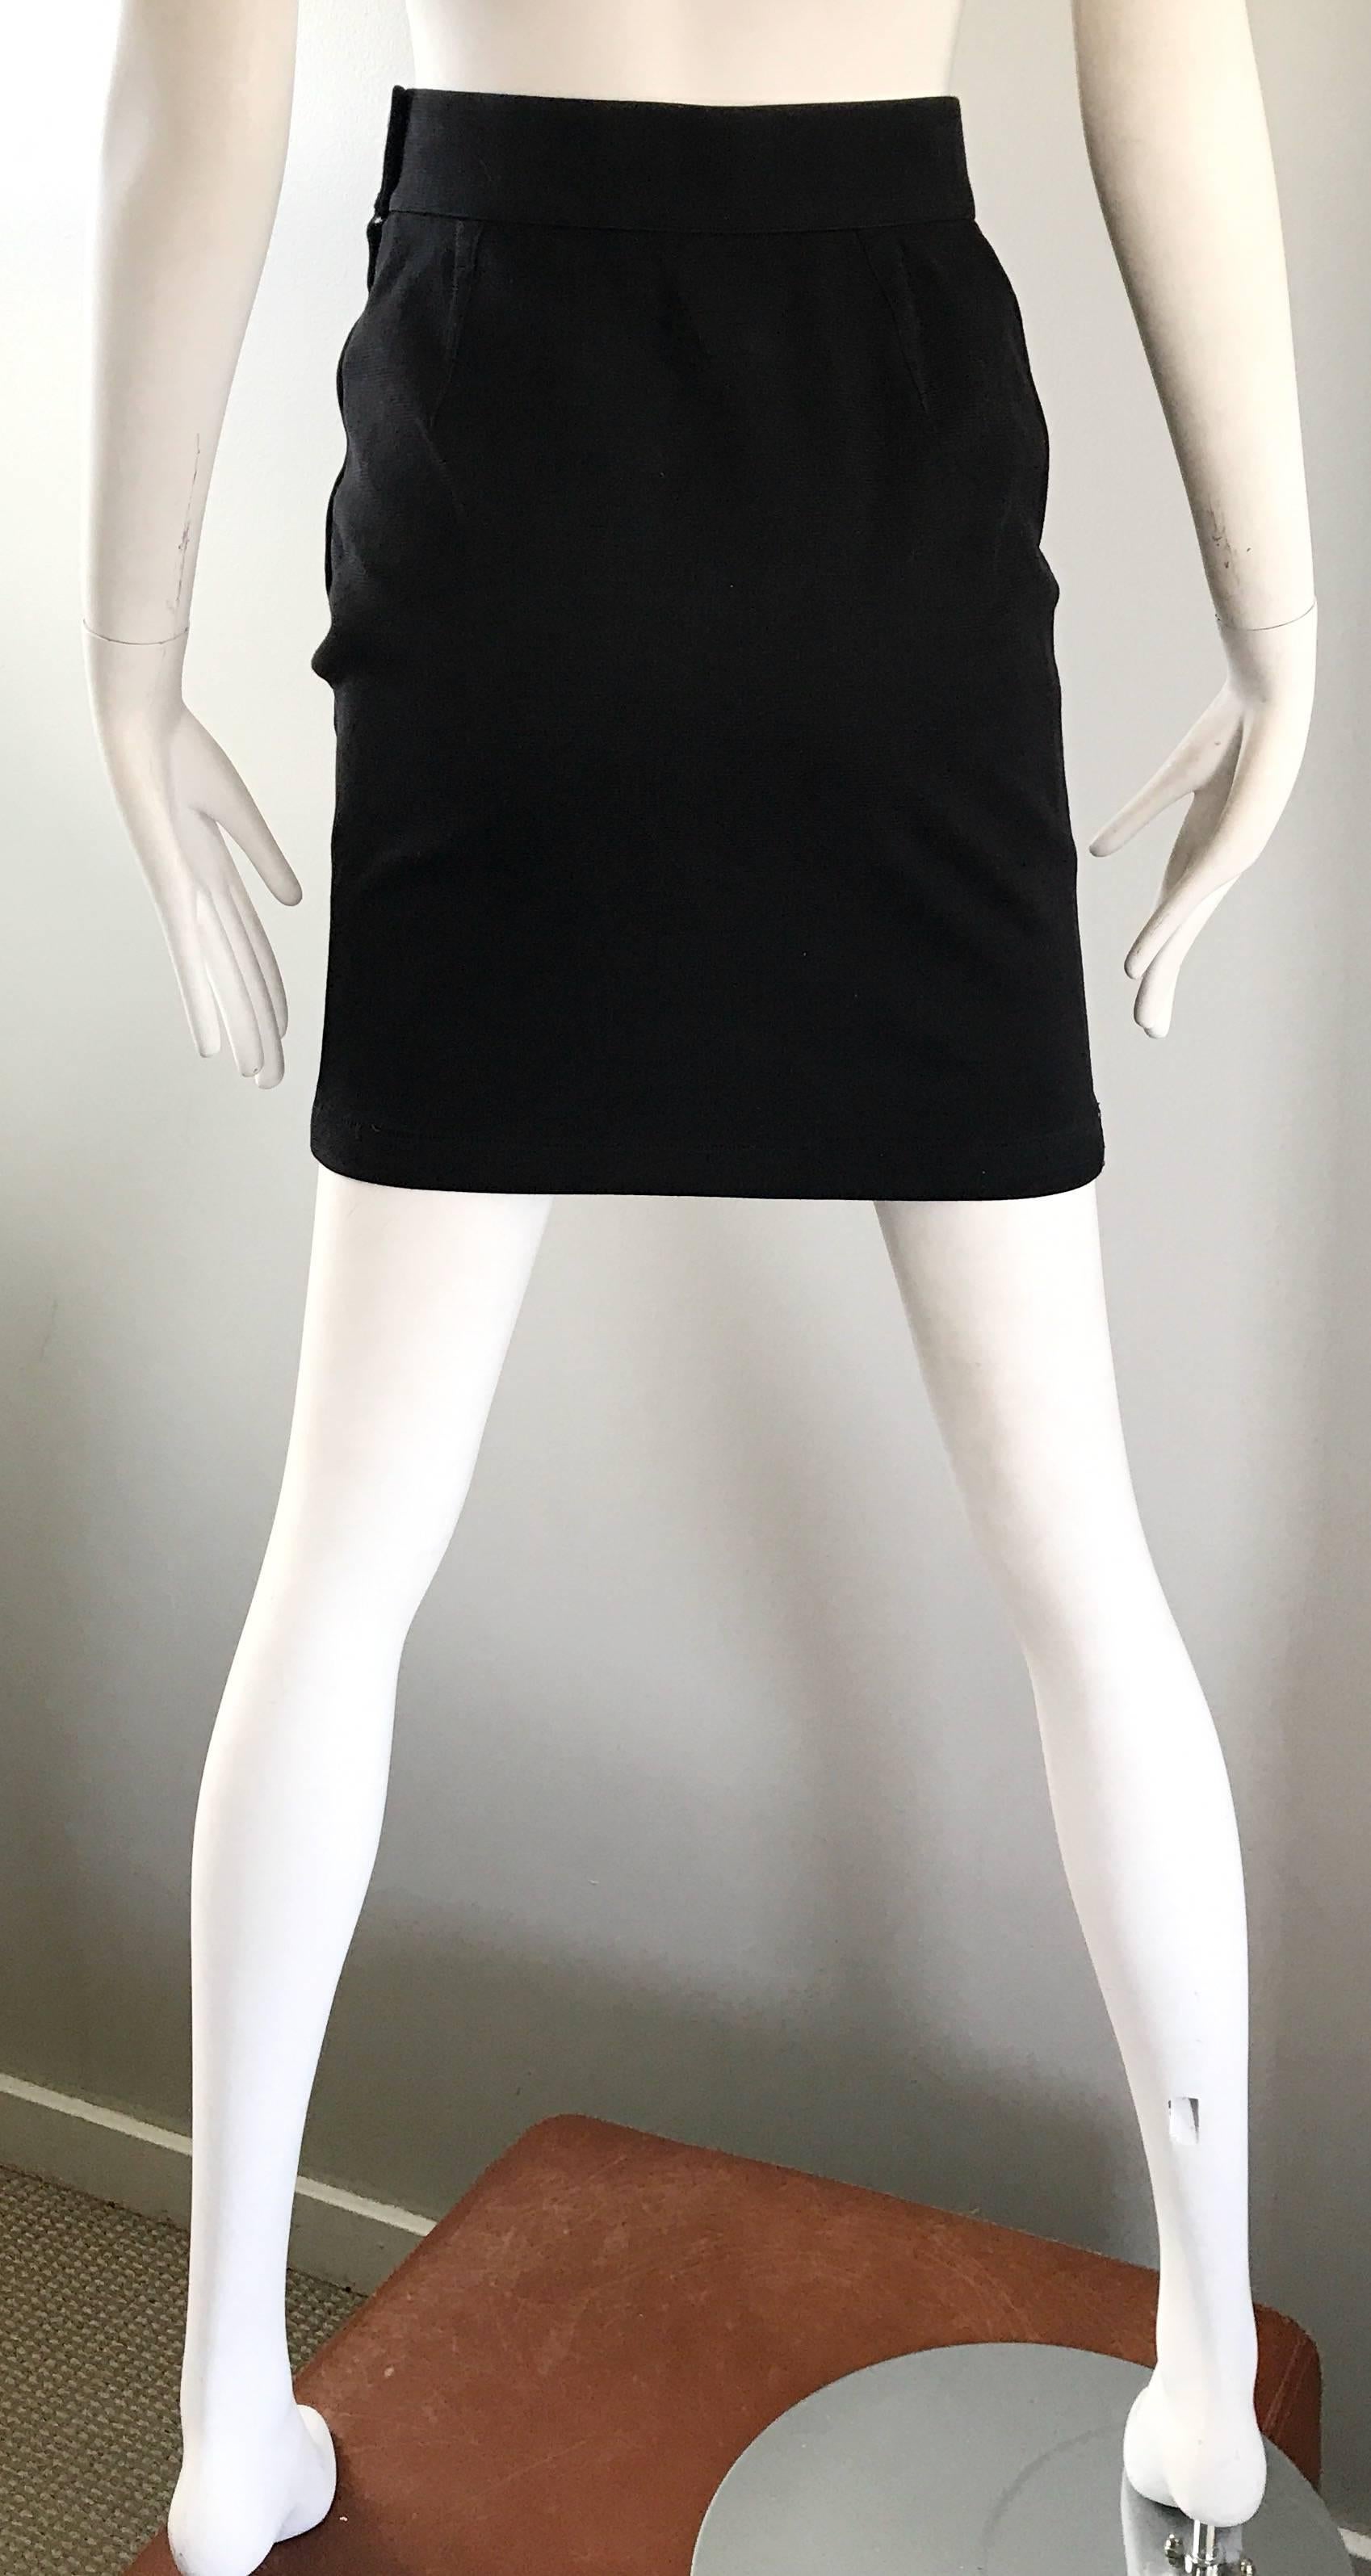 Women's 1990s Thierry Mugler Black High Waisted VIntage 90s Stretch Mini Pencil Skirt